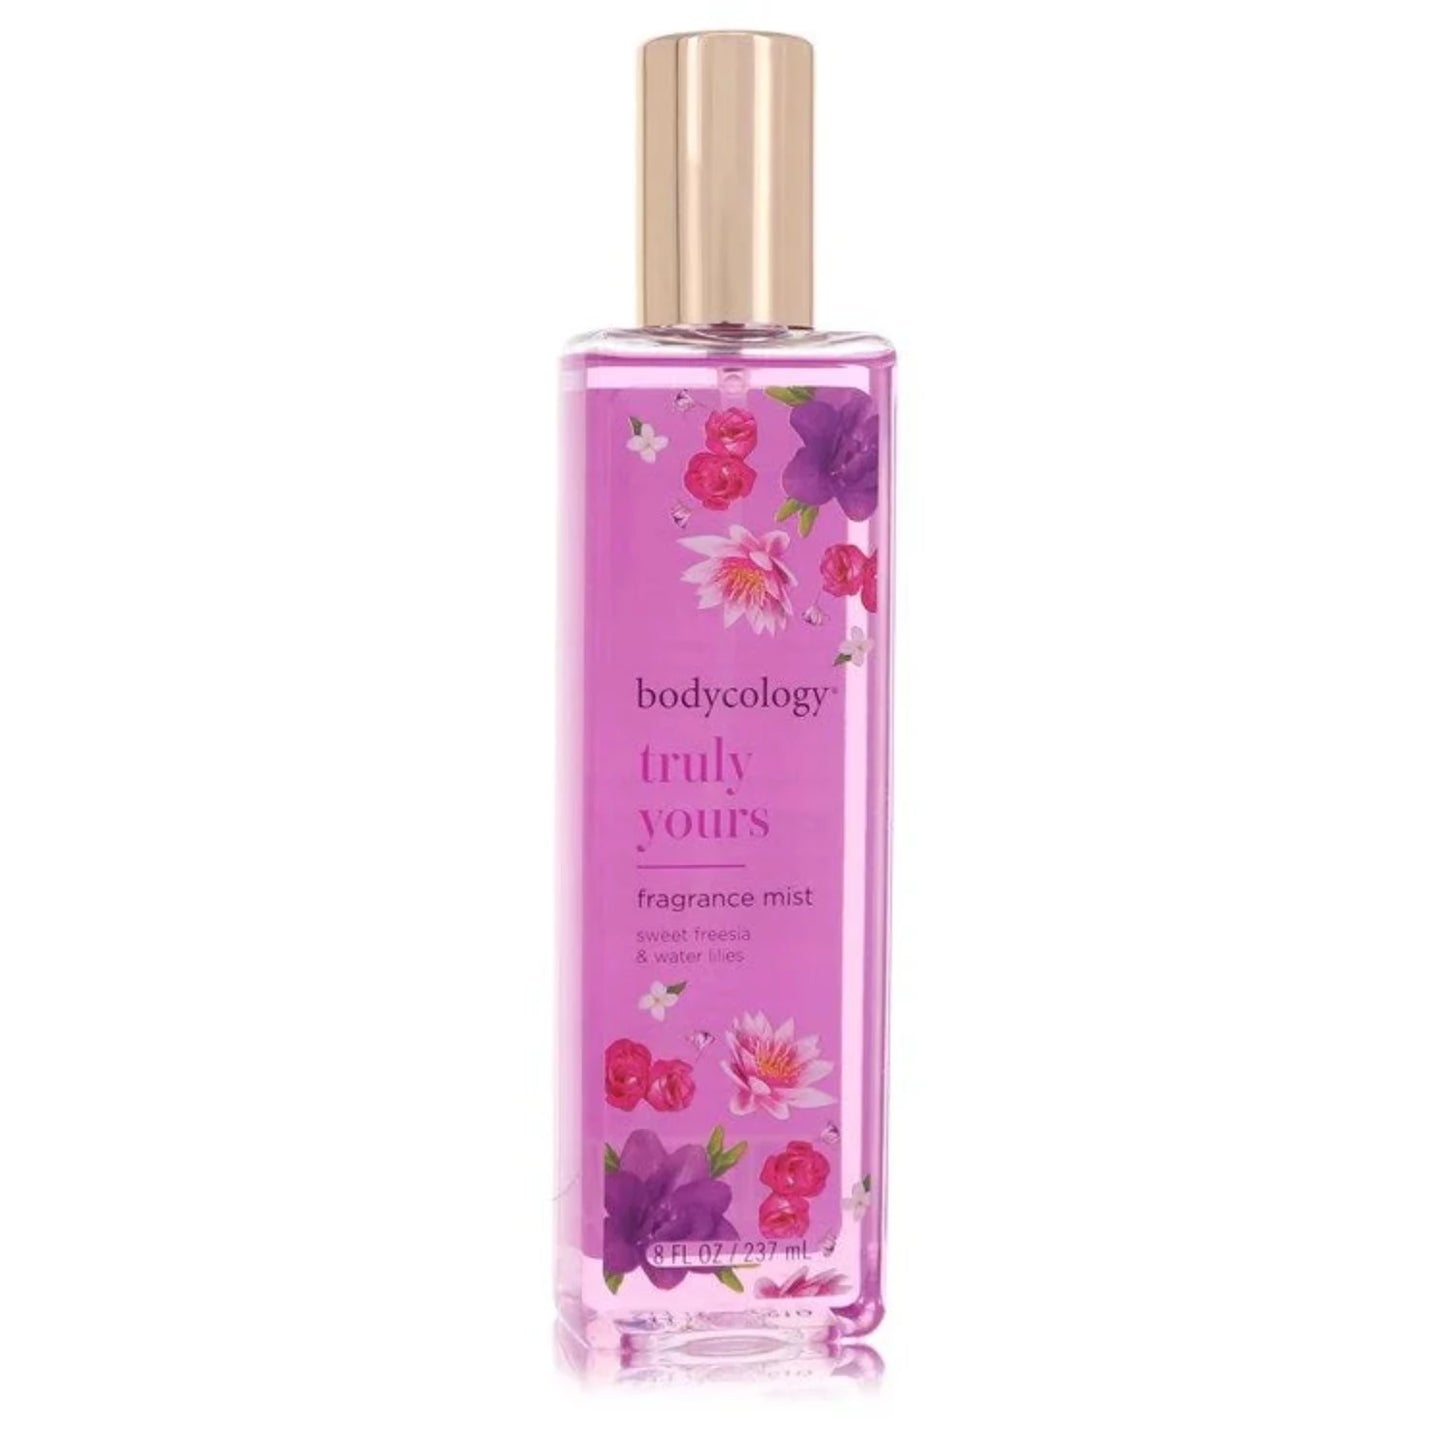 Bodycology Truly Yours Fragrance Mist Spray By Bodycology for women, Parfums De Coeur